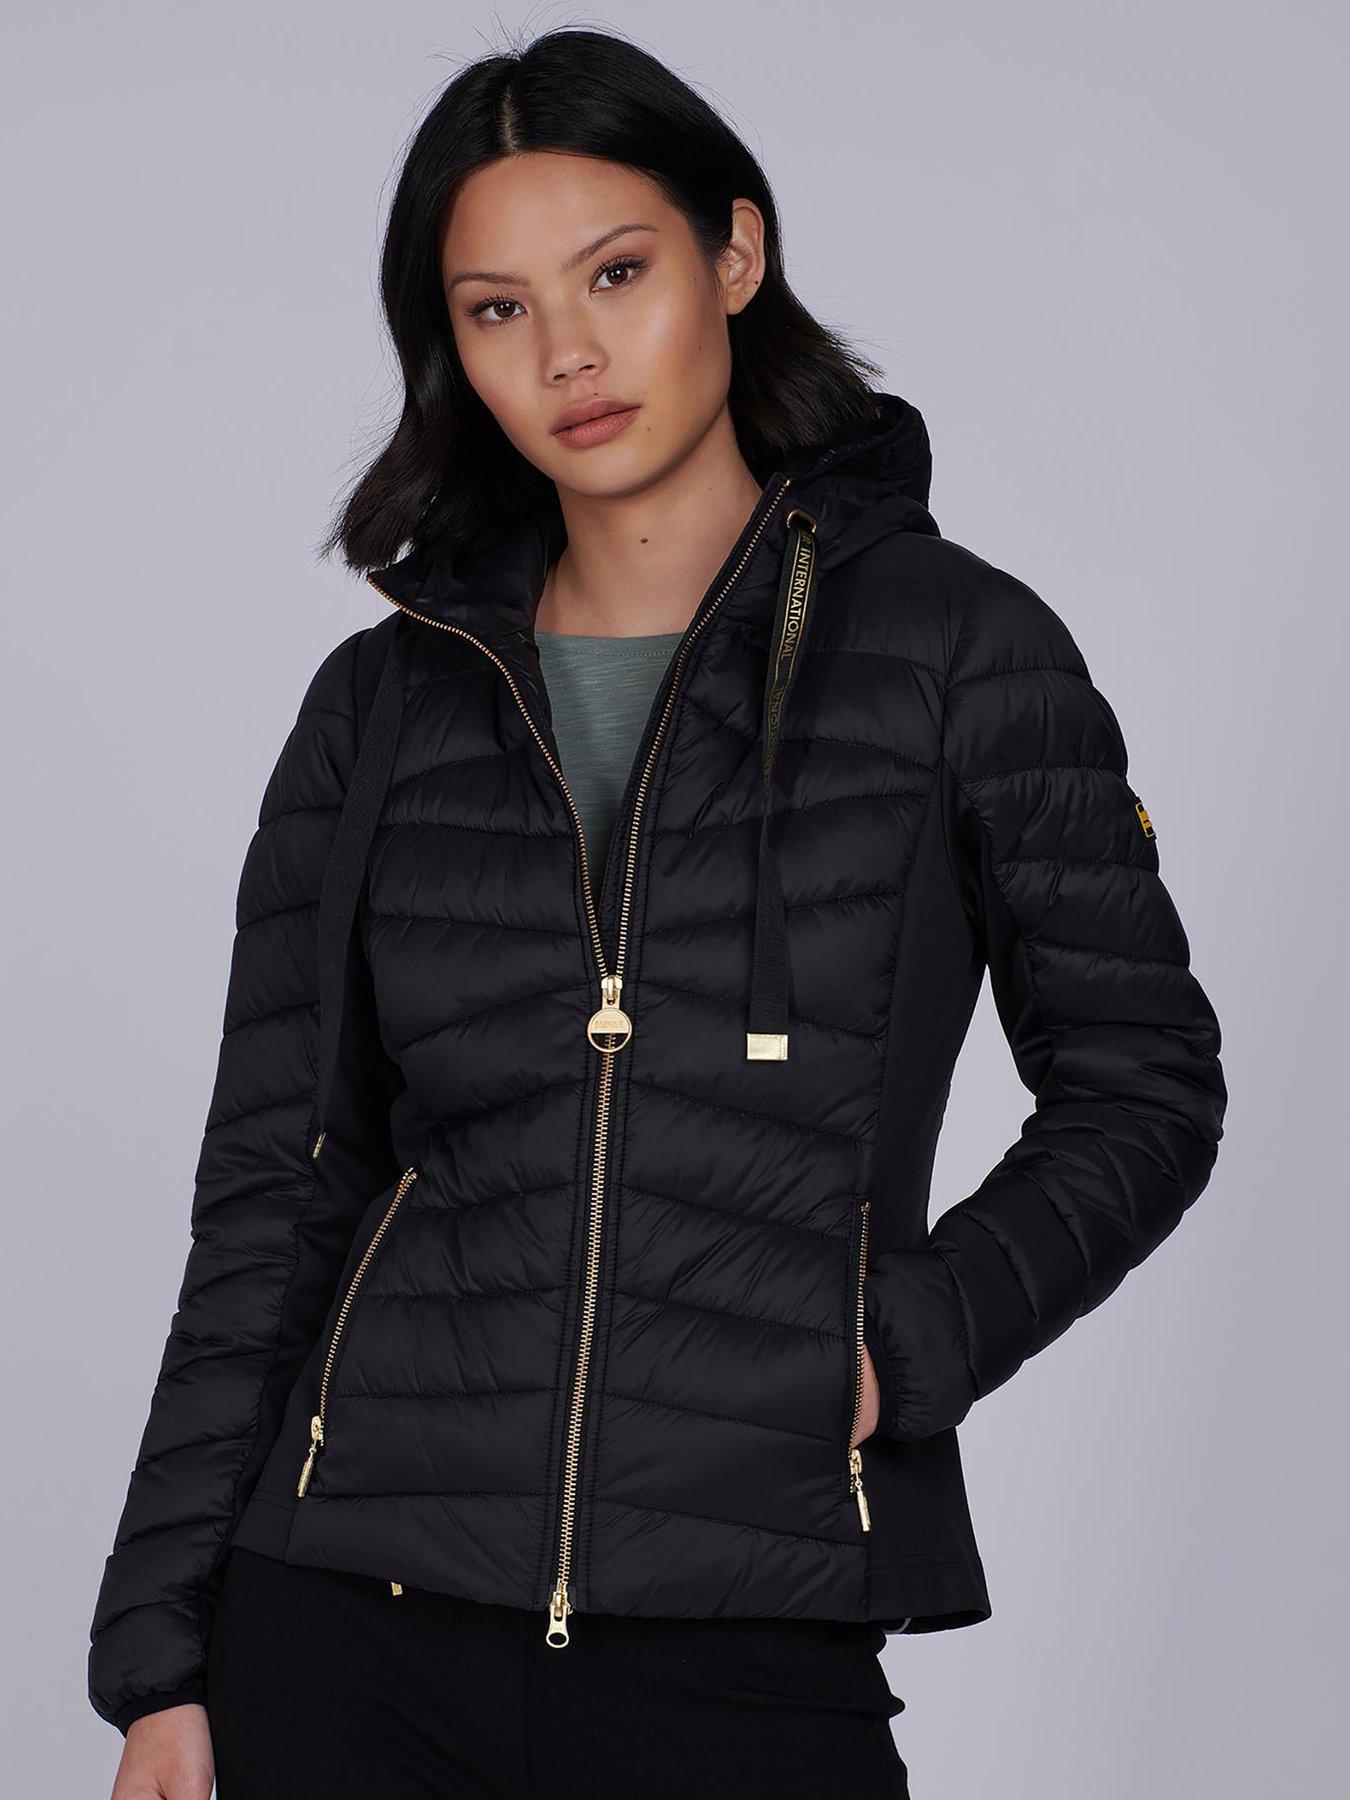 Barbour Jacket Womens | Womens Barbour 